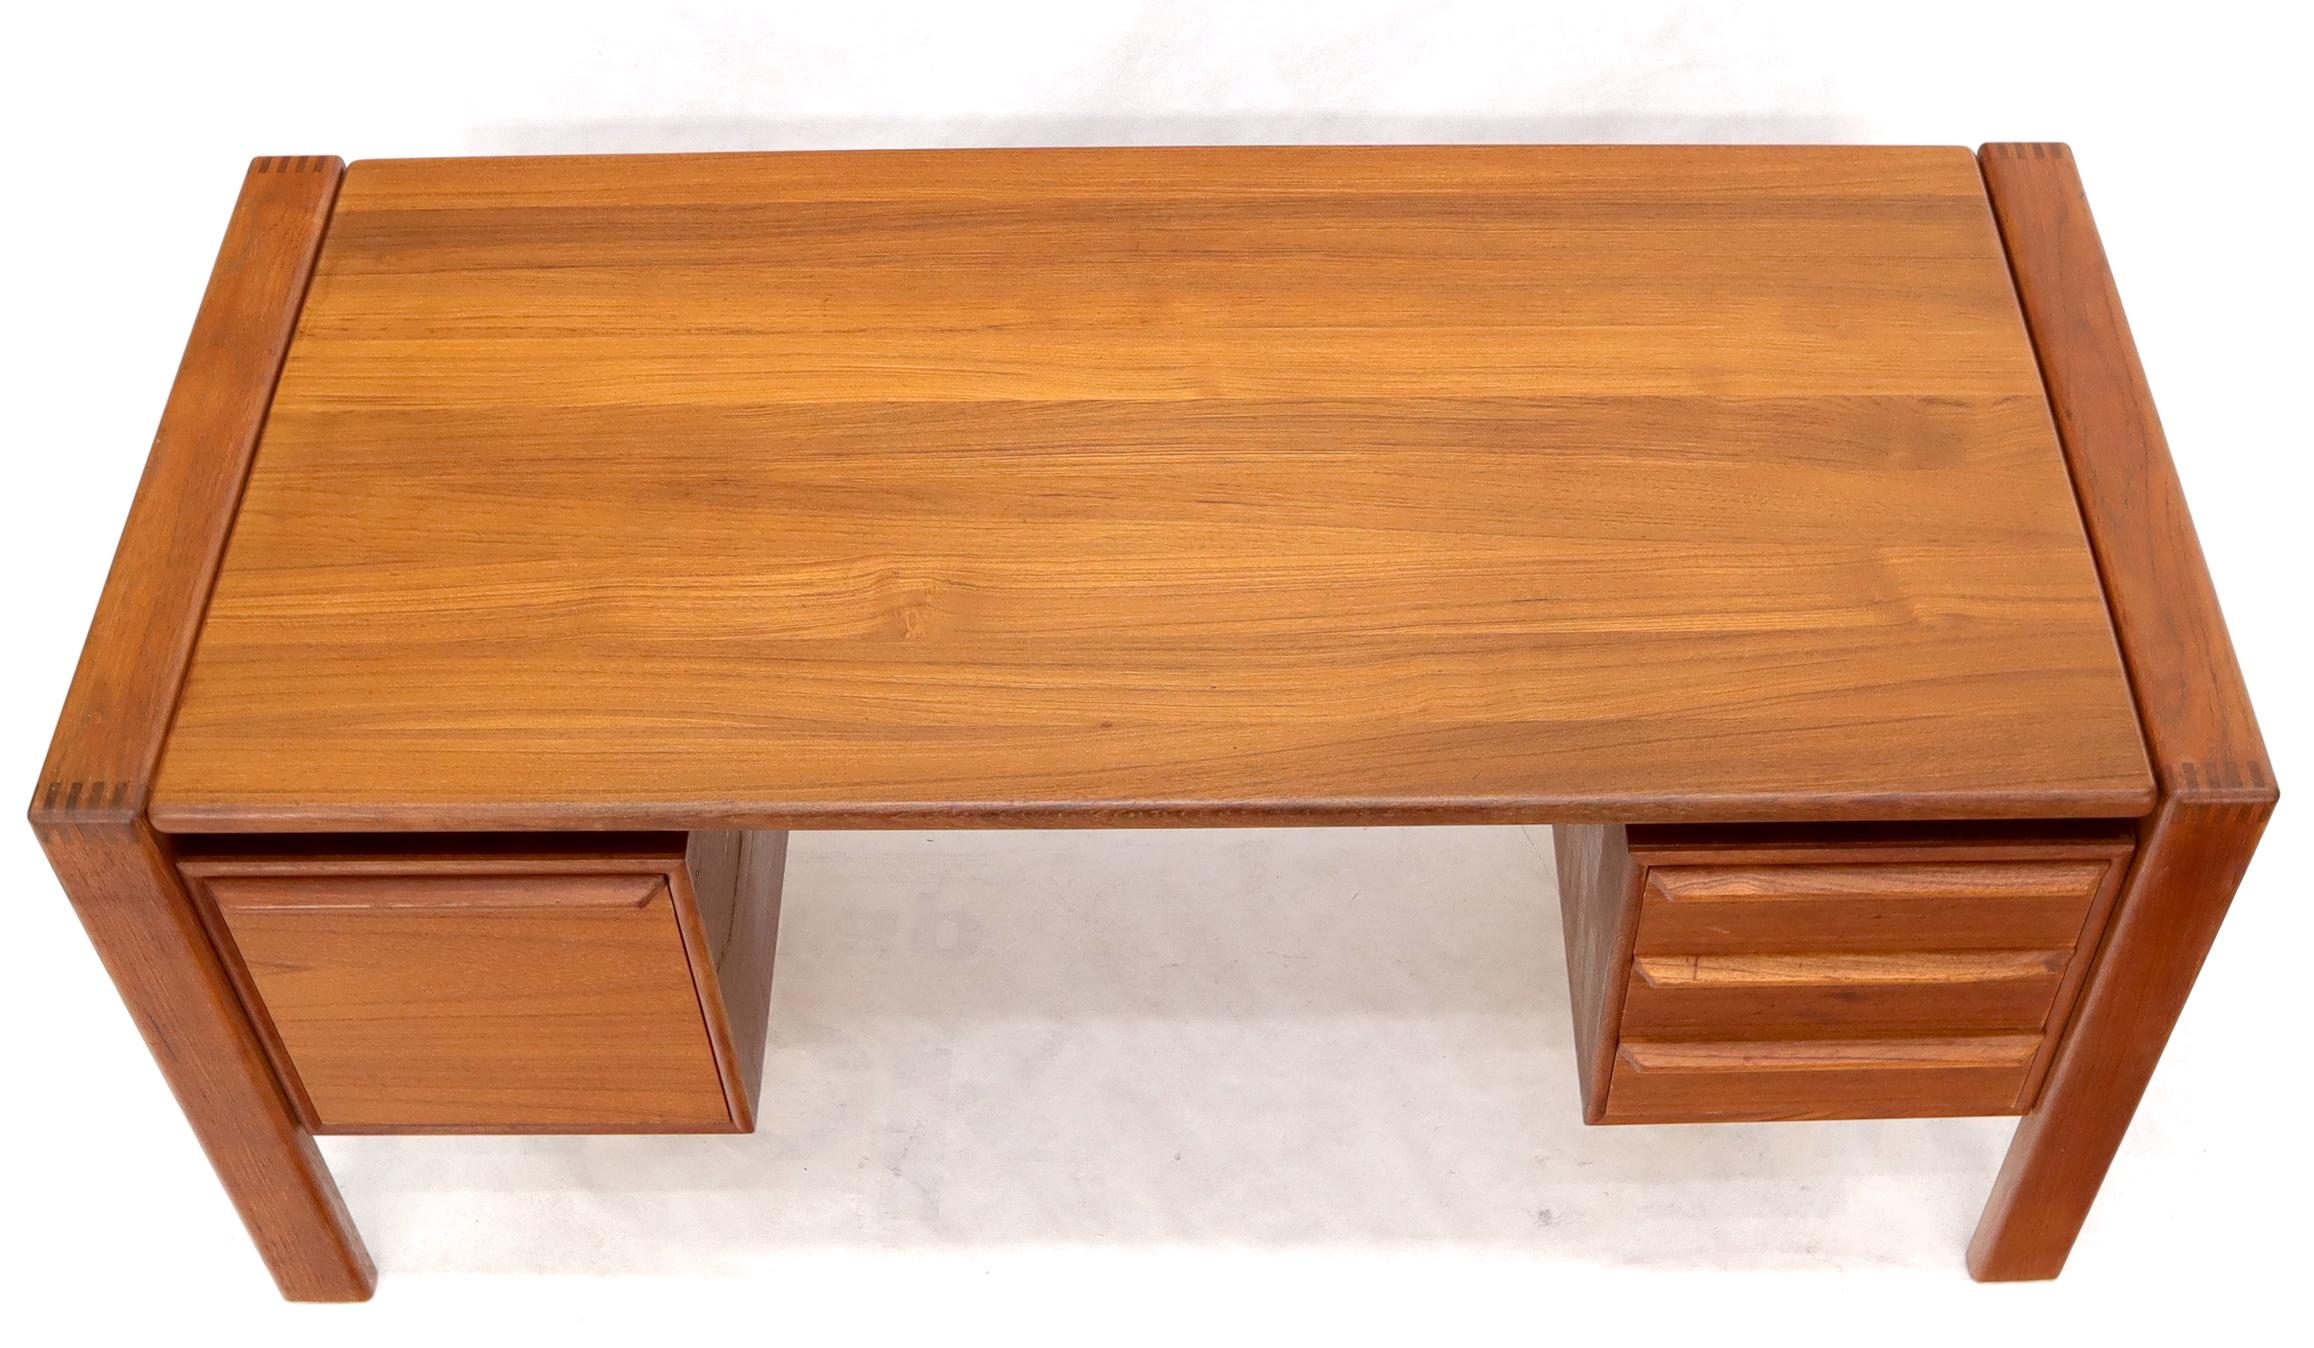 20th Century Executive Solid Teak Midcentury Danish Modern Desk with Bookcase and File Drawer